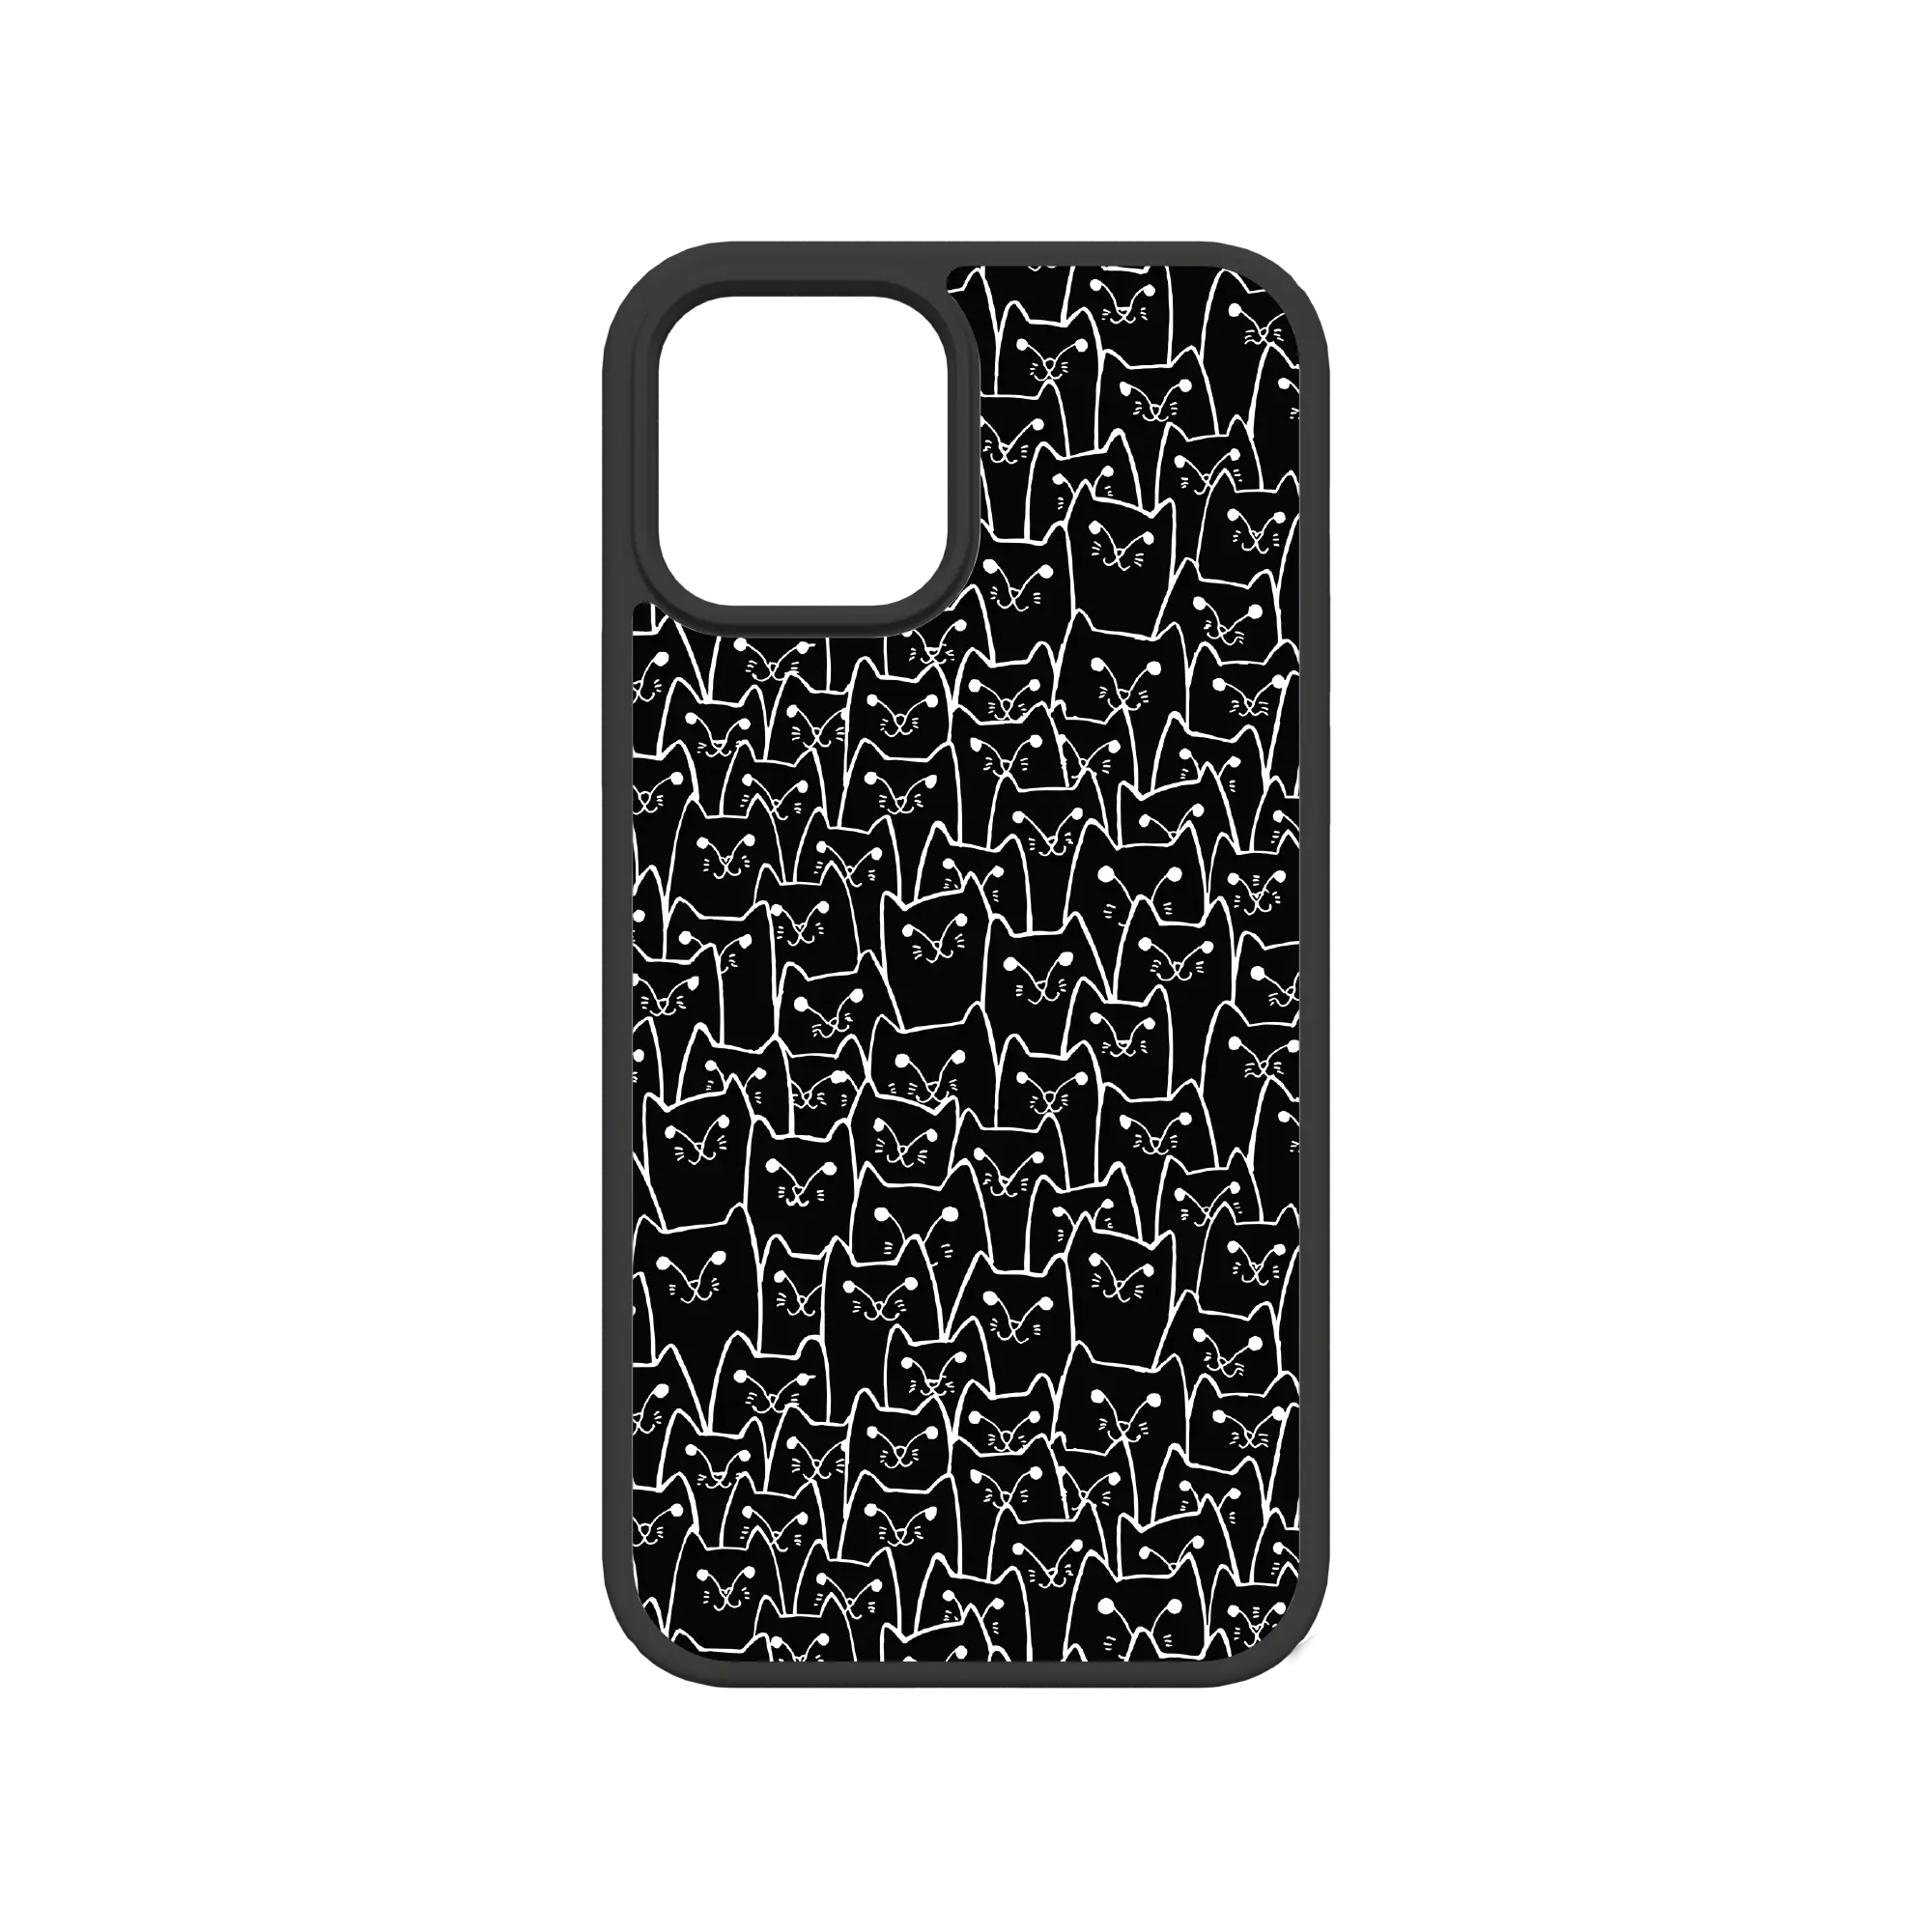 Apple-iPhone-12-12-Pro-Crystal-Clear Black Cat Pattern | Protective MagSafe Case | Cats Meow Series for Apple iPhone 12 Series cellhelmet cellhelmet